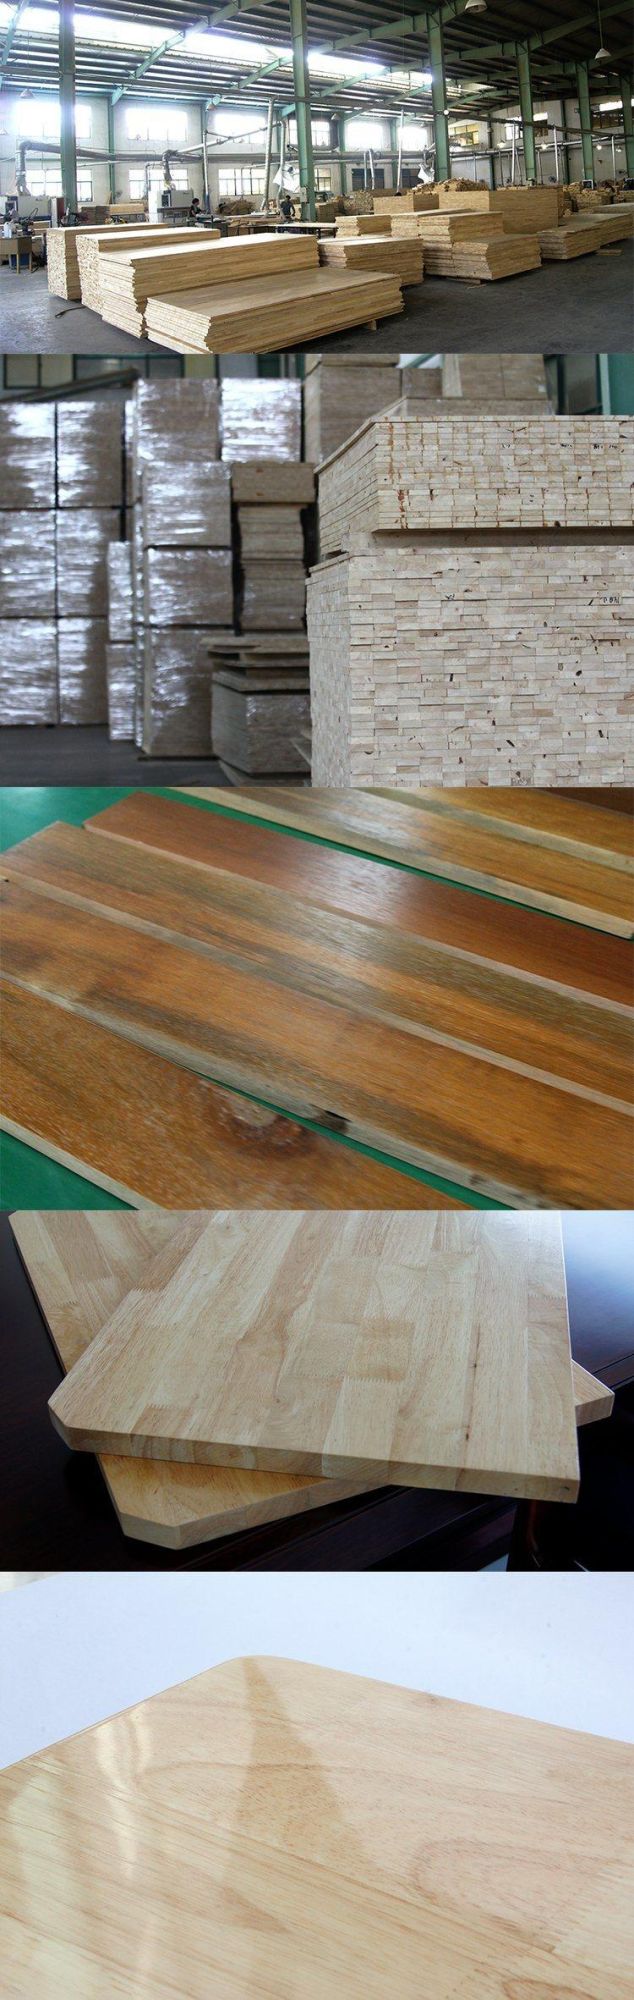 100% Solid Wood Rubber Wood Nice Dining Table